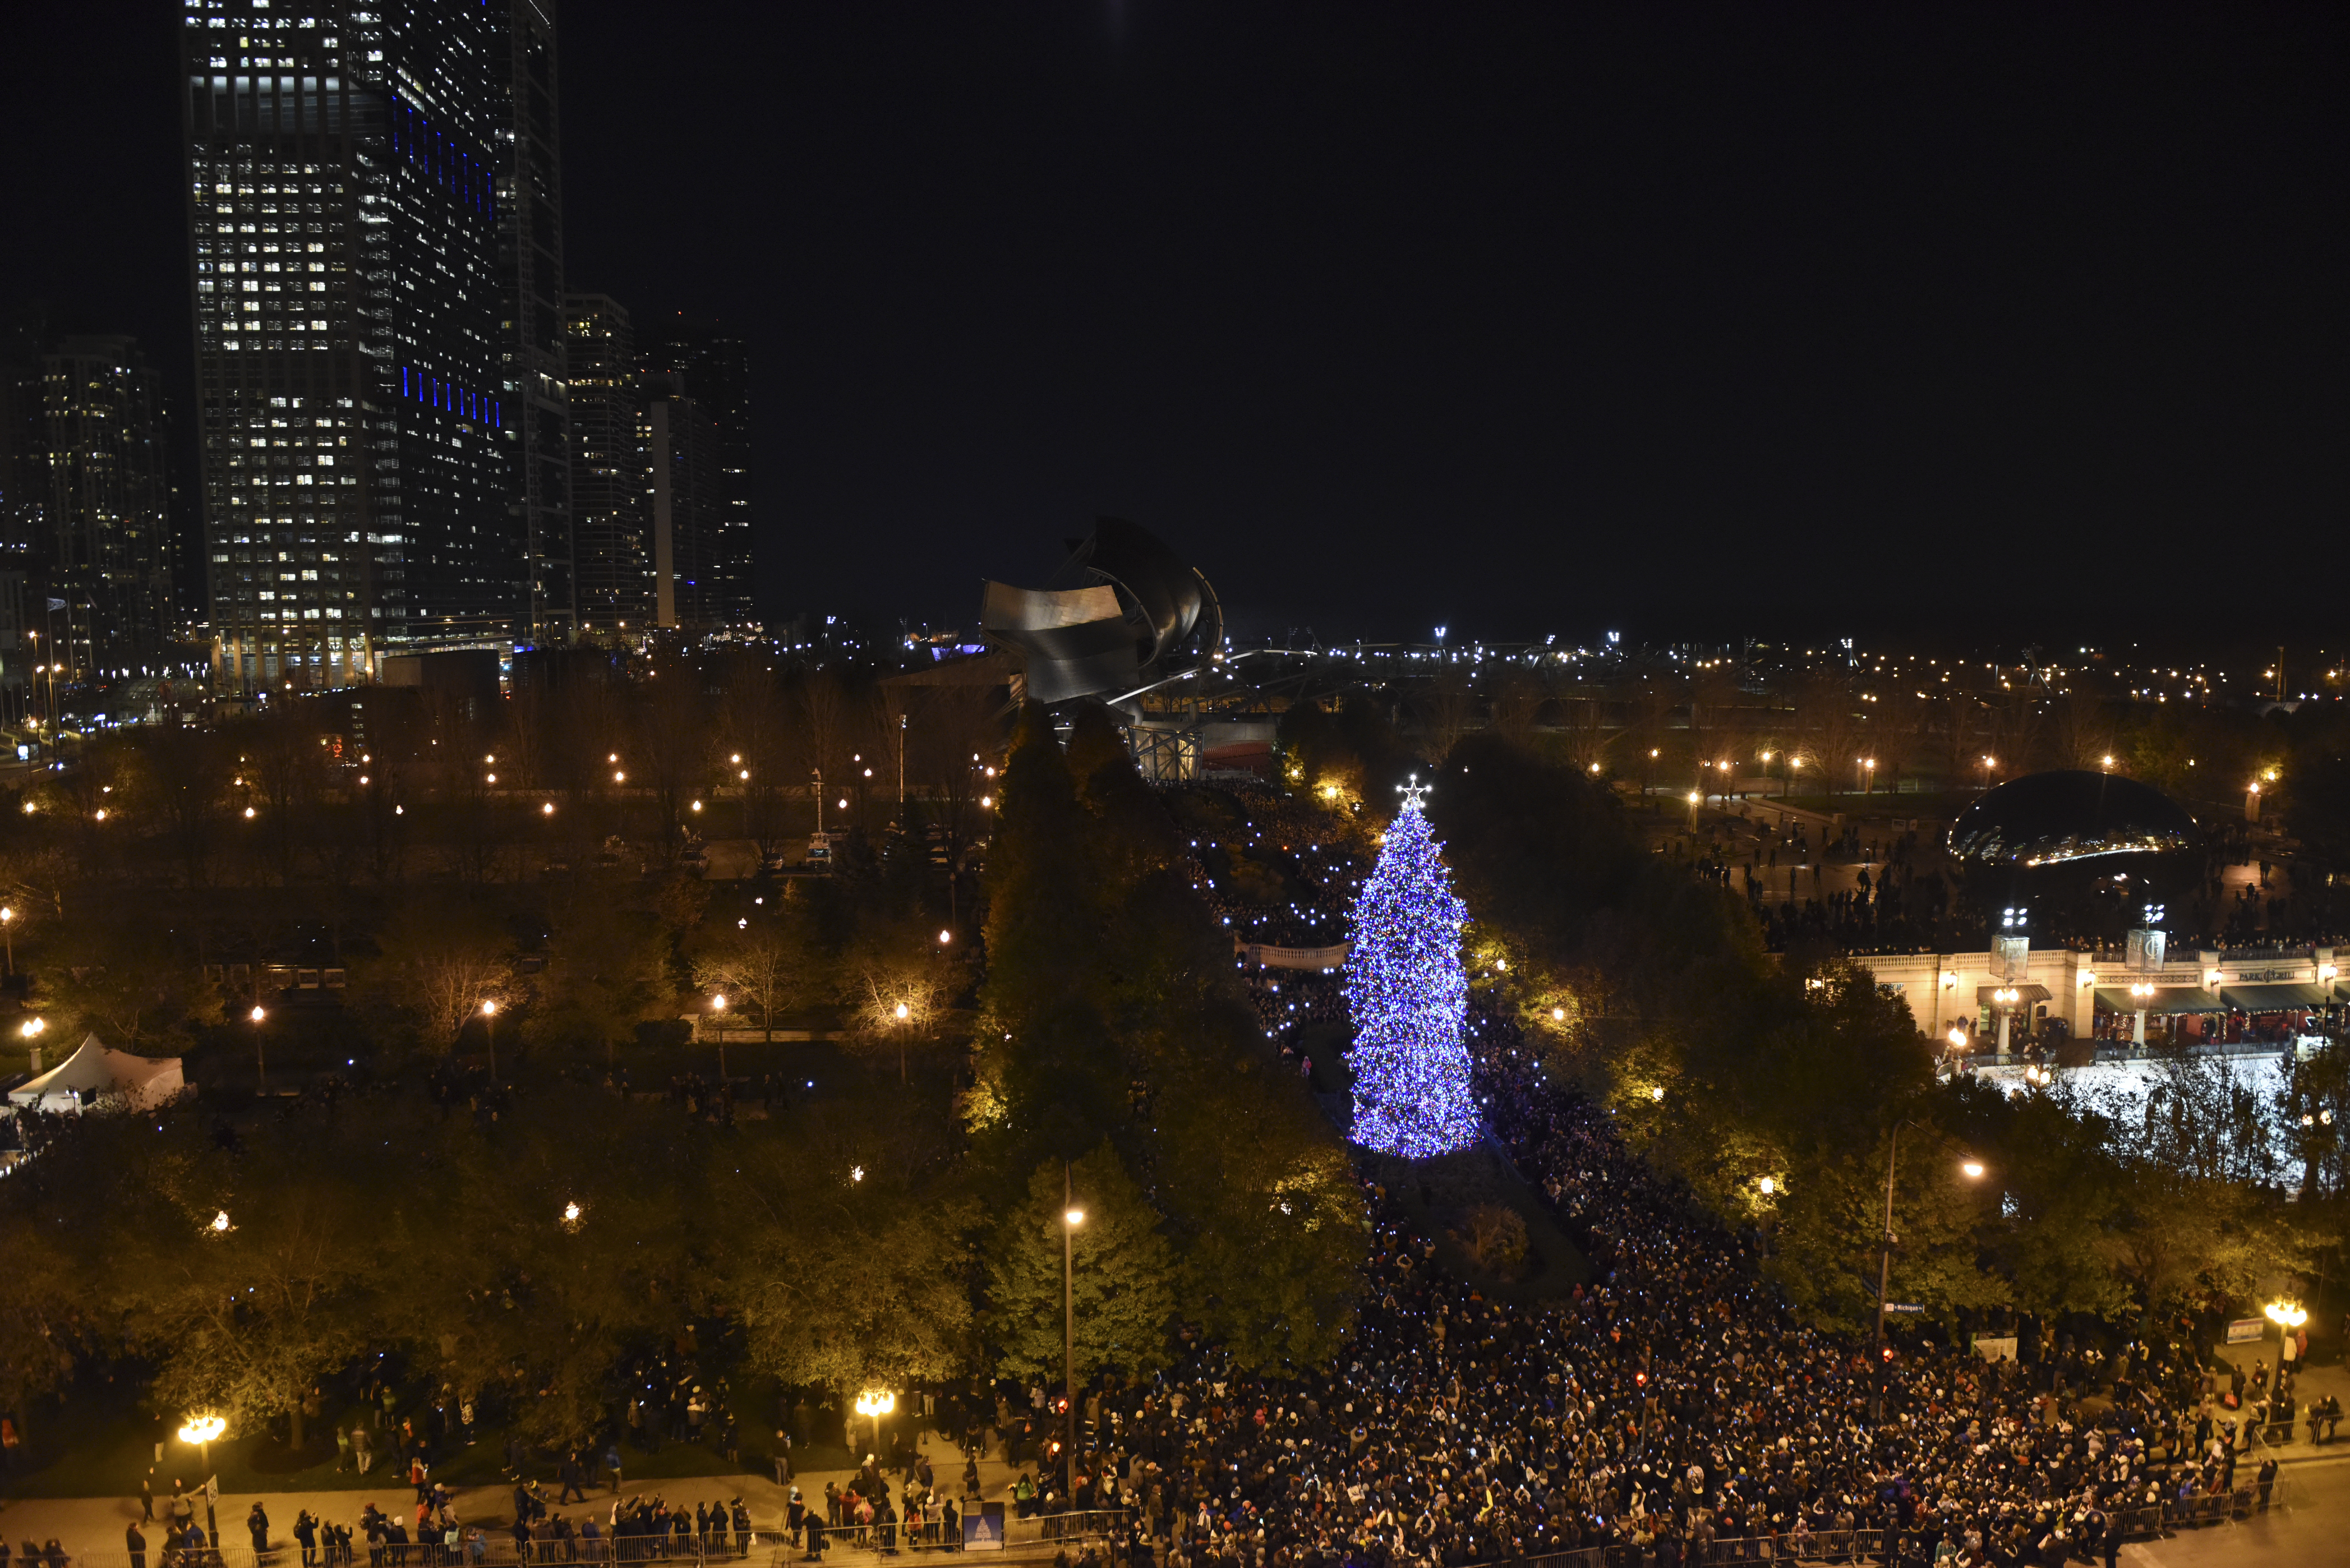 City Picks 60 Foot Christmas Tree From Elmhurst To Decorate Millennium Park This Winter